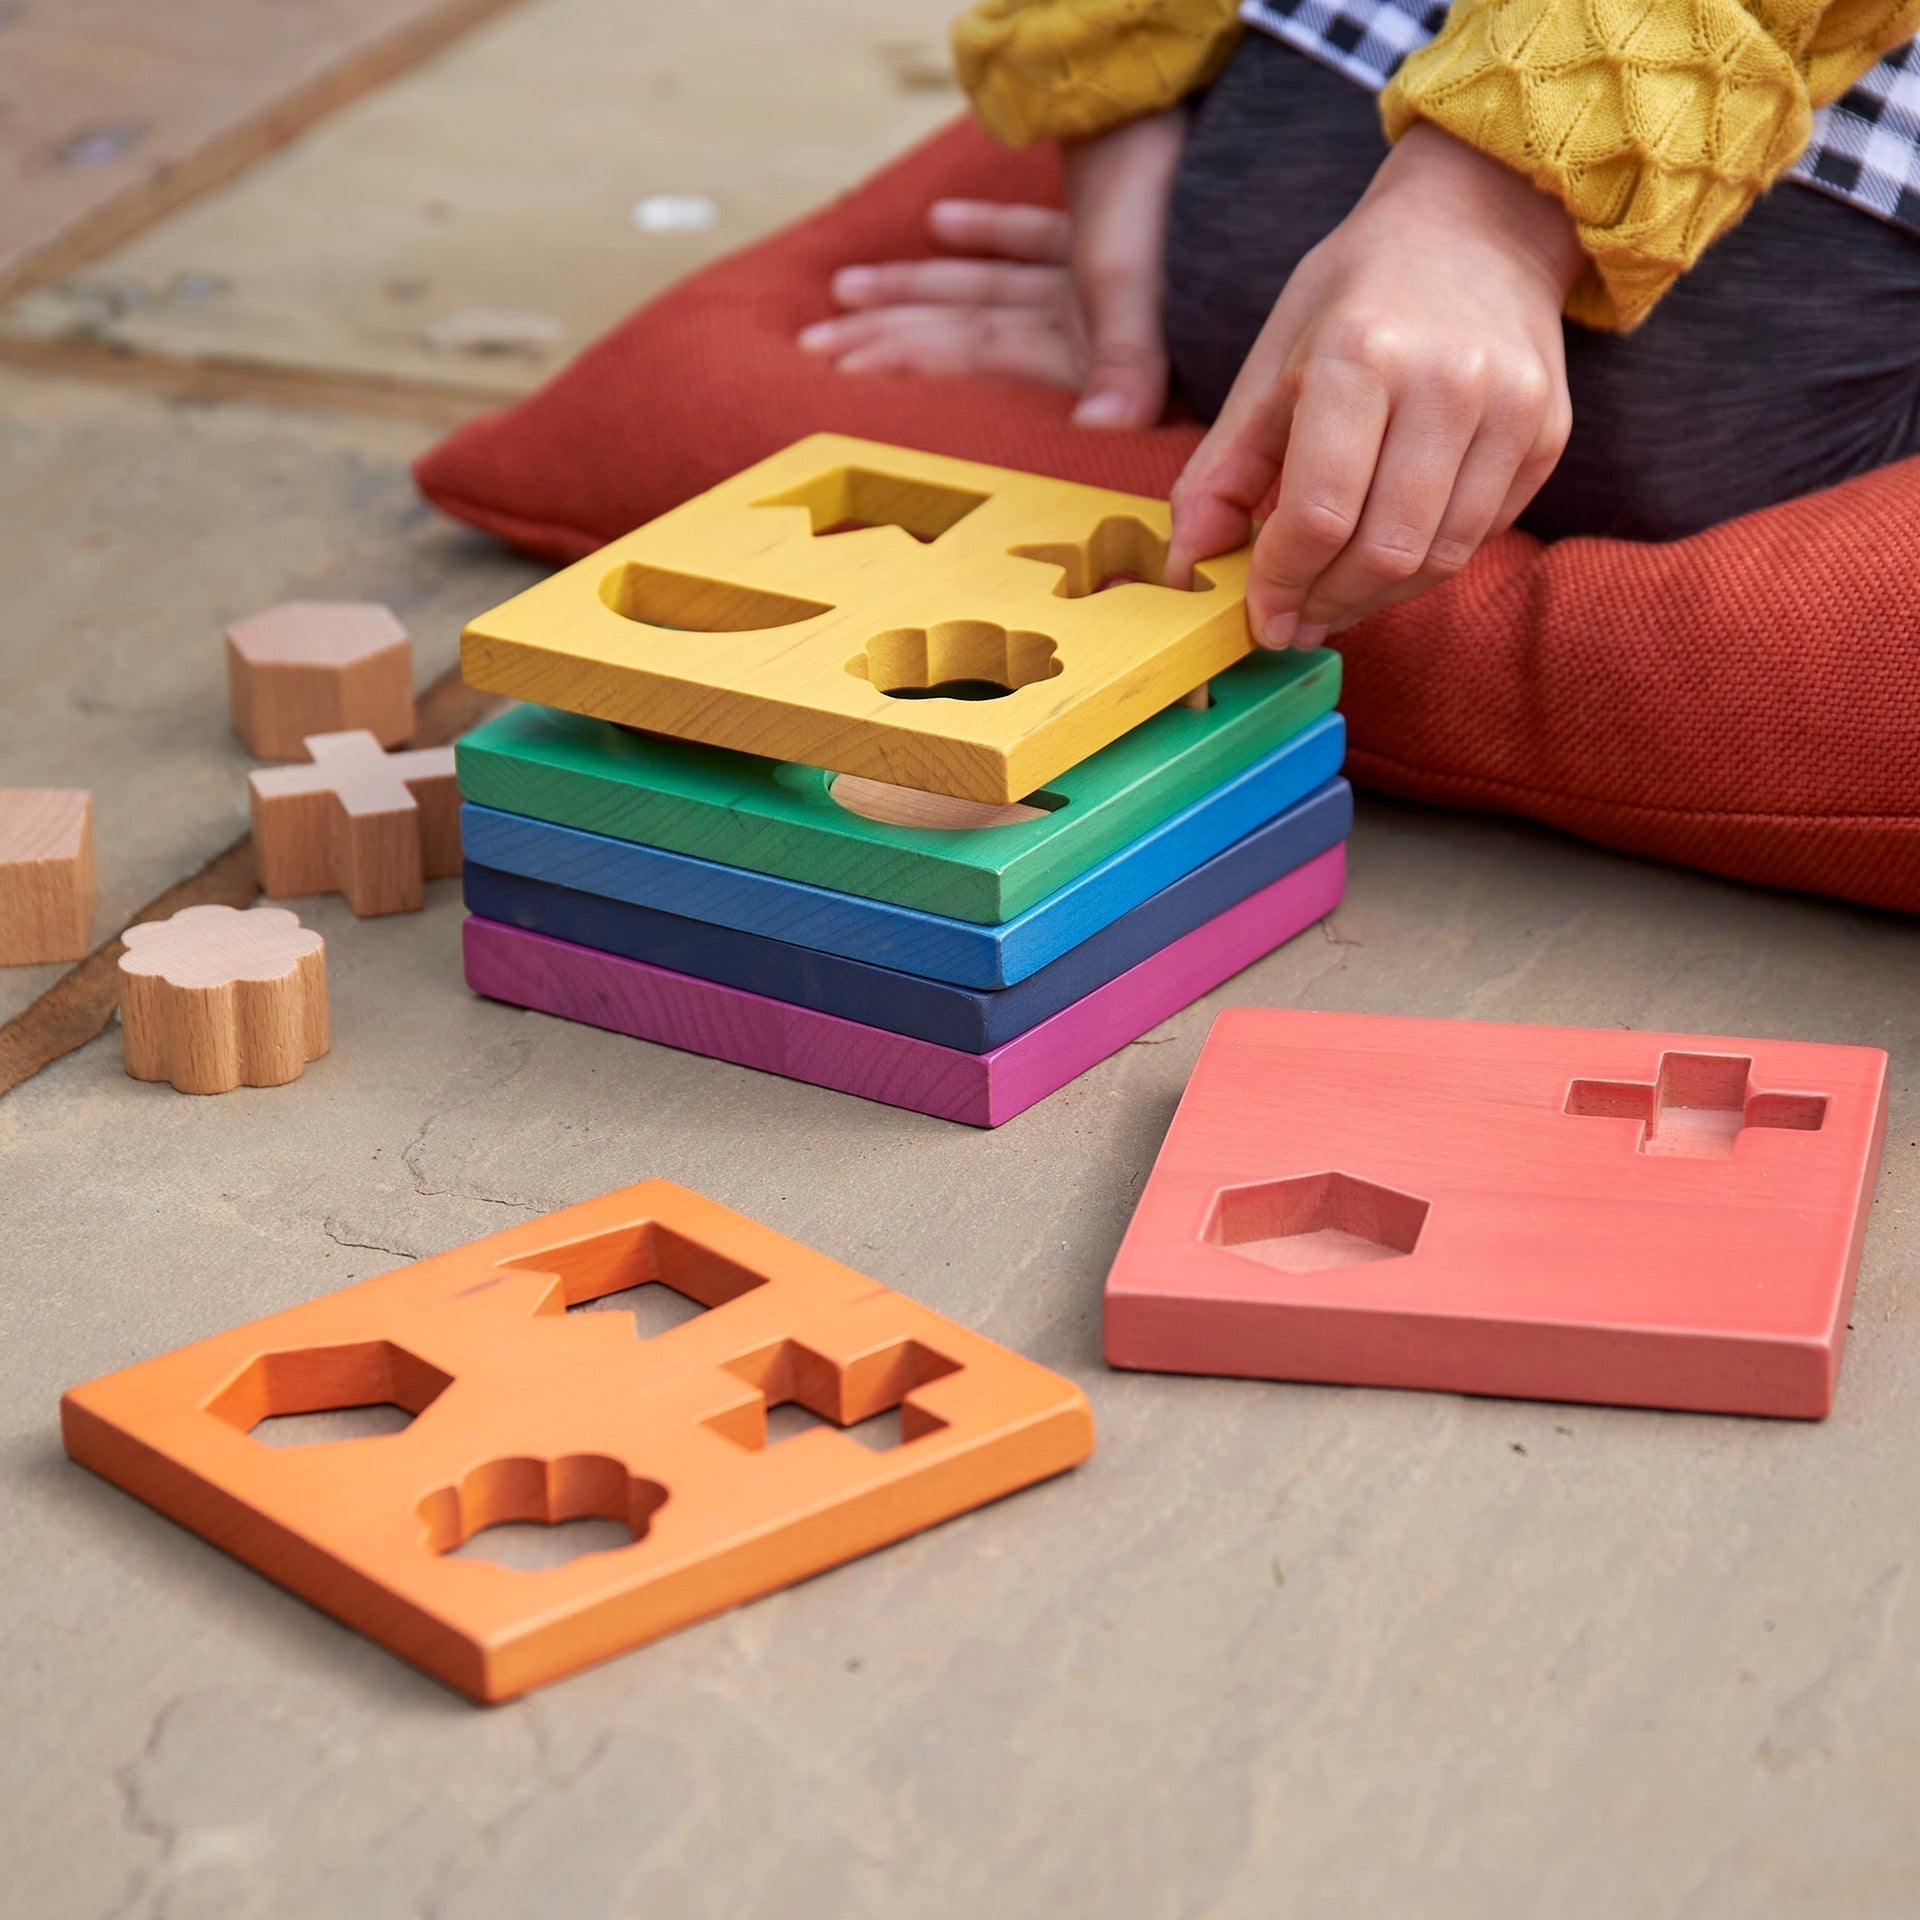 Rainbow Wooden Shape Stacker, Our TickiT® Rainbow Wooden Shape Stacker is a colourful and fun puzzle to help your child with shape recognition and problem solving skills. Made from beautiful smooth solid beechwood with a natural woodgrain finish in the 7 different colours of the rainbow. The 12 tactile shape cut outs nest inside a rounded square panel so your child can practice fitting them into their matching shaped hole or stack them to build a rainbow shape tower. The wooden panels are red, orange, yello